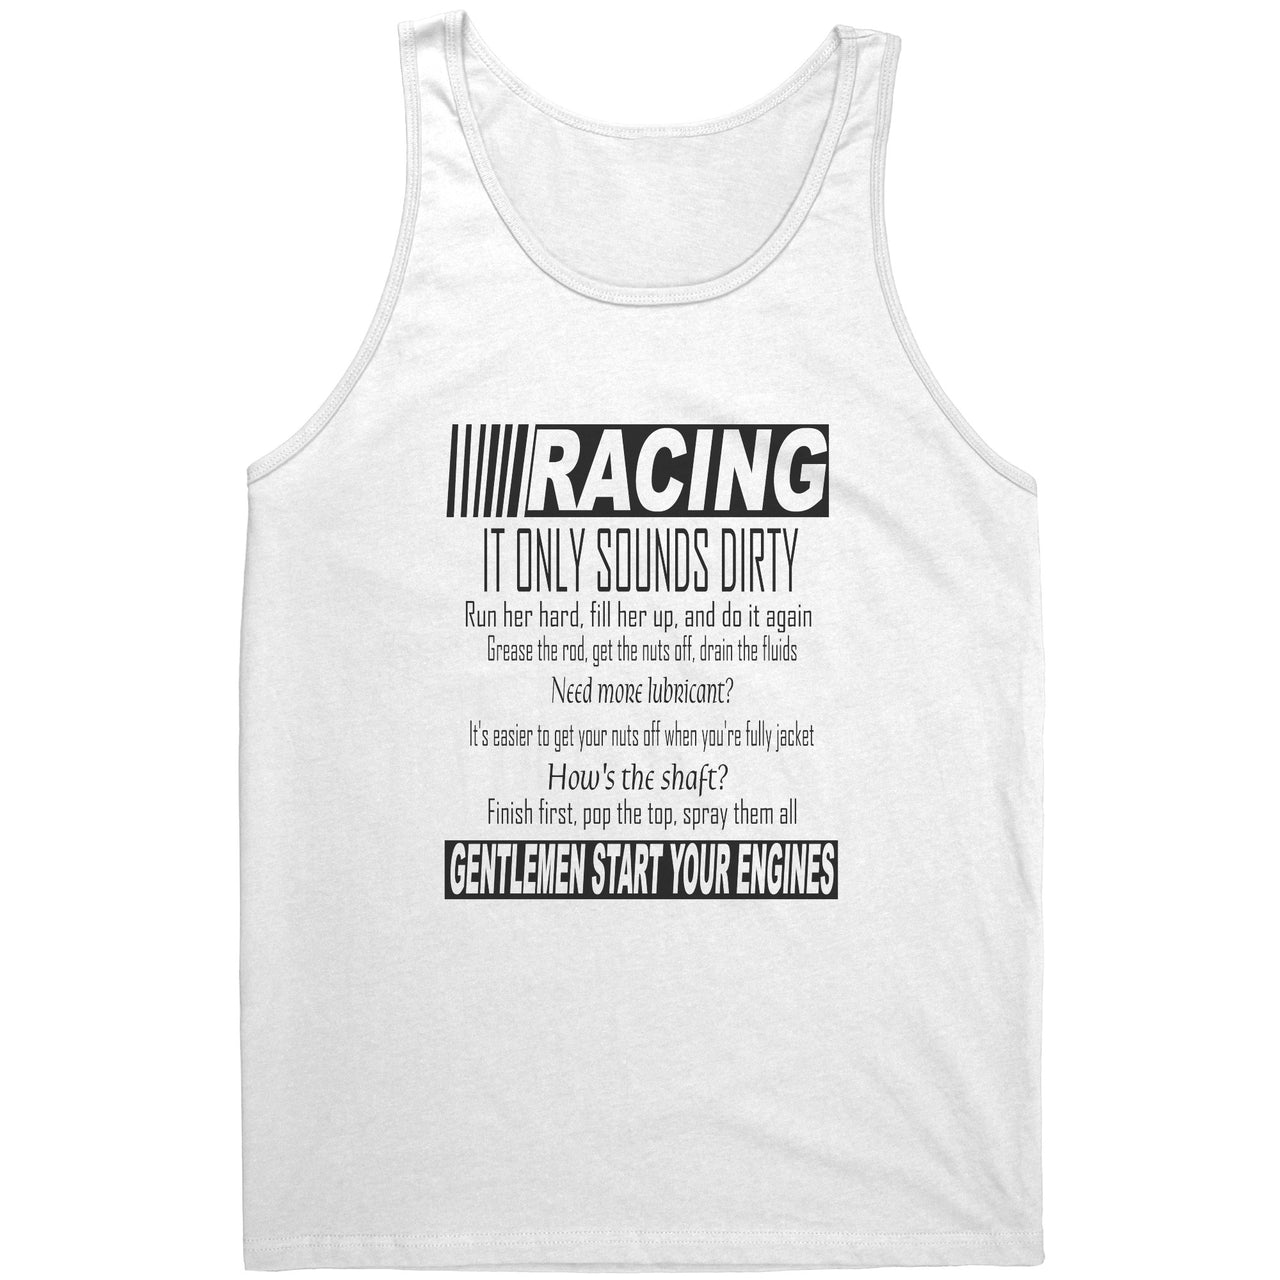 Racing It only sounds dirty Tanks/Hoodies BV